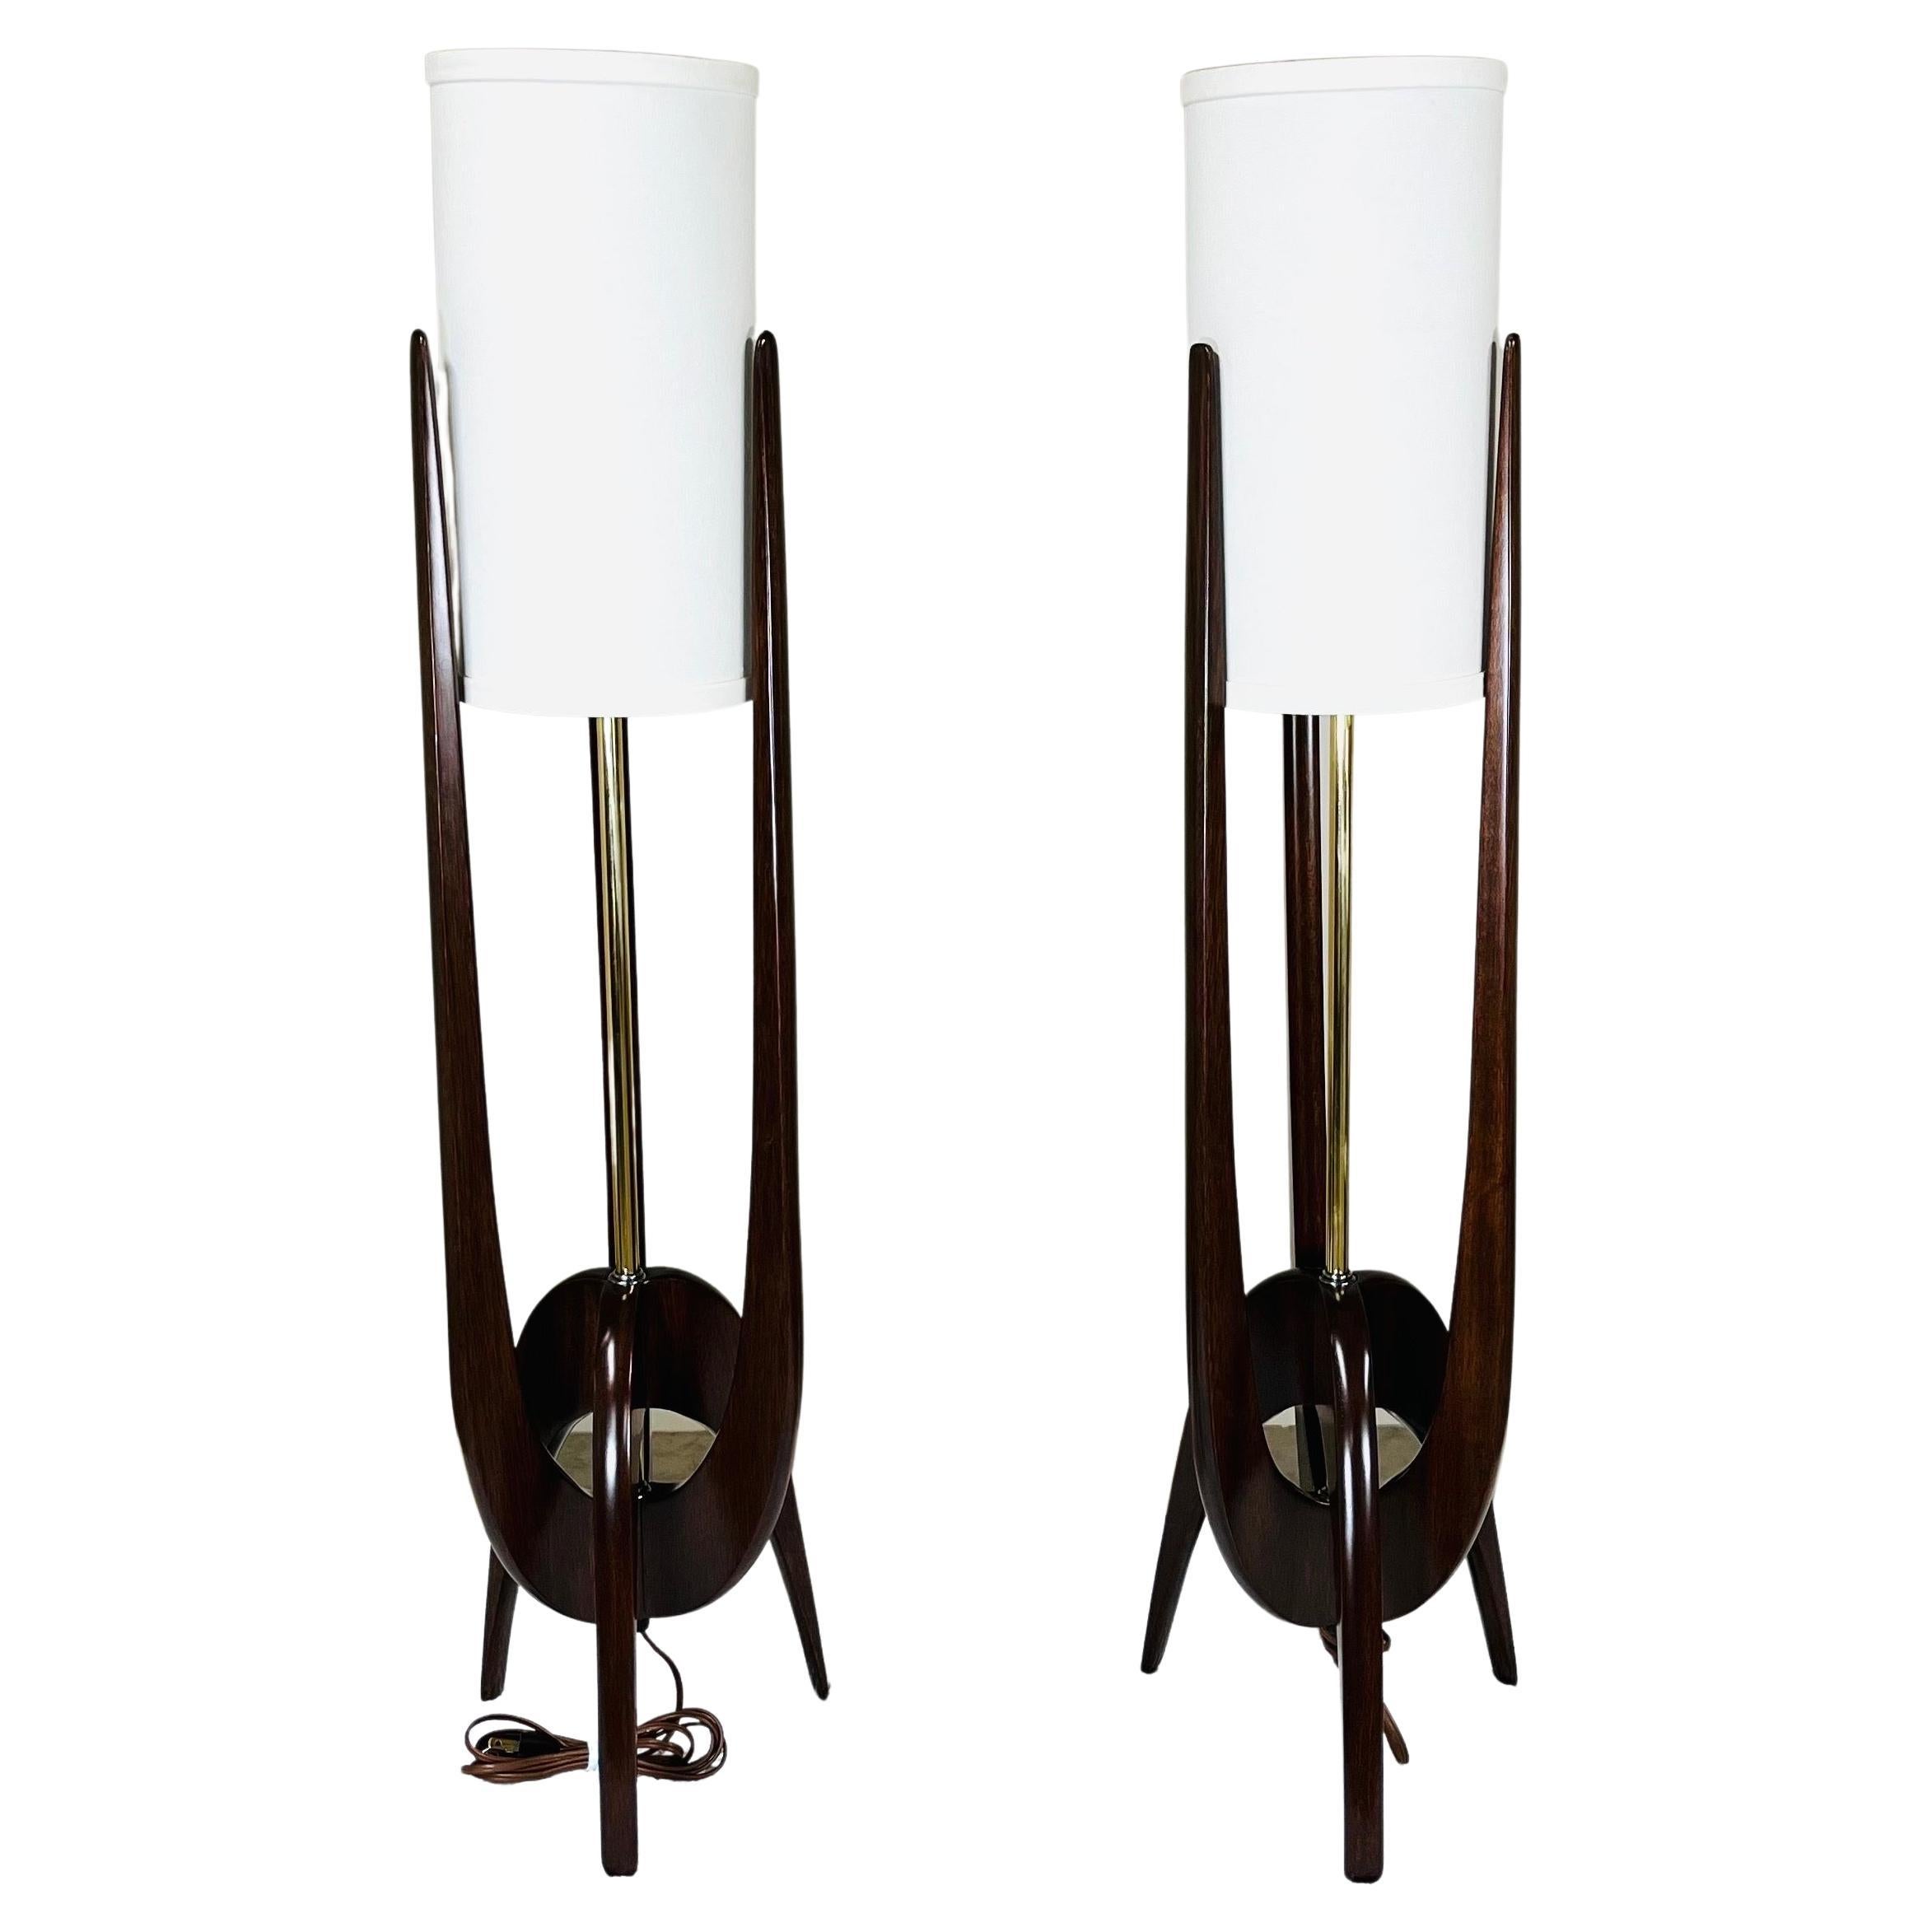 A stunning pair of sculptural mahogany trident table lamps attributed to John Keal and produced by Modeline circa 1960 having newly refinished frames with new shades and fresh wiring. 
In perfect condition and fully functional. These are time